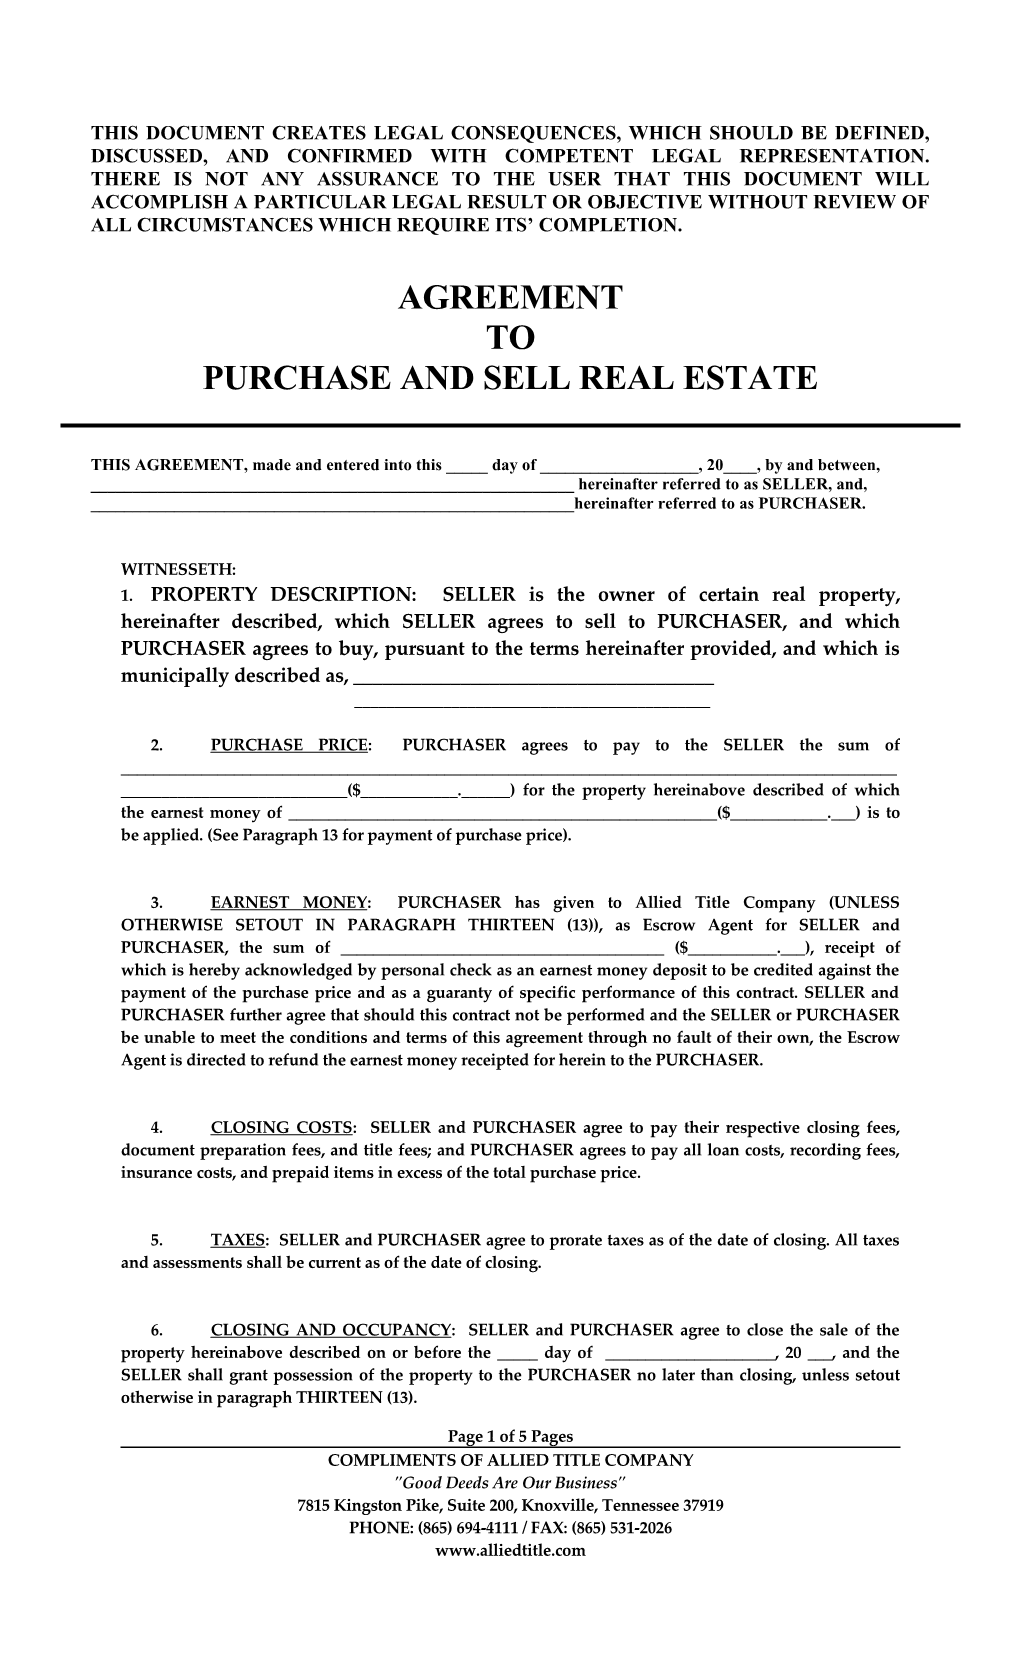 Purchase and Sell Real Estate